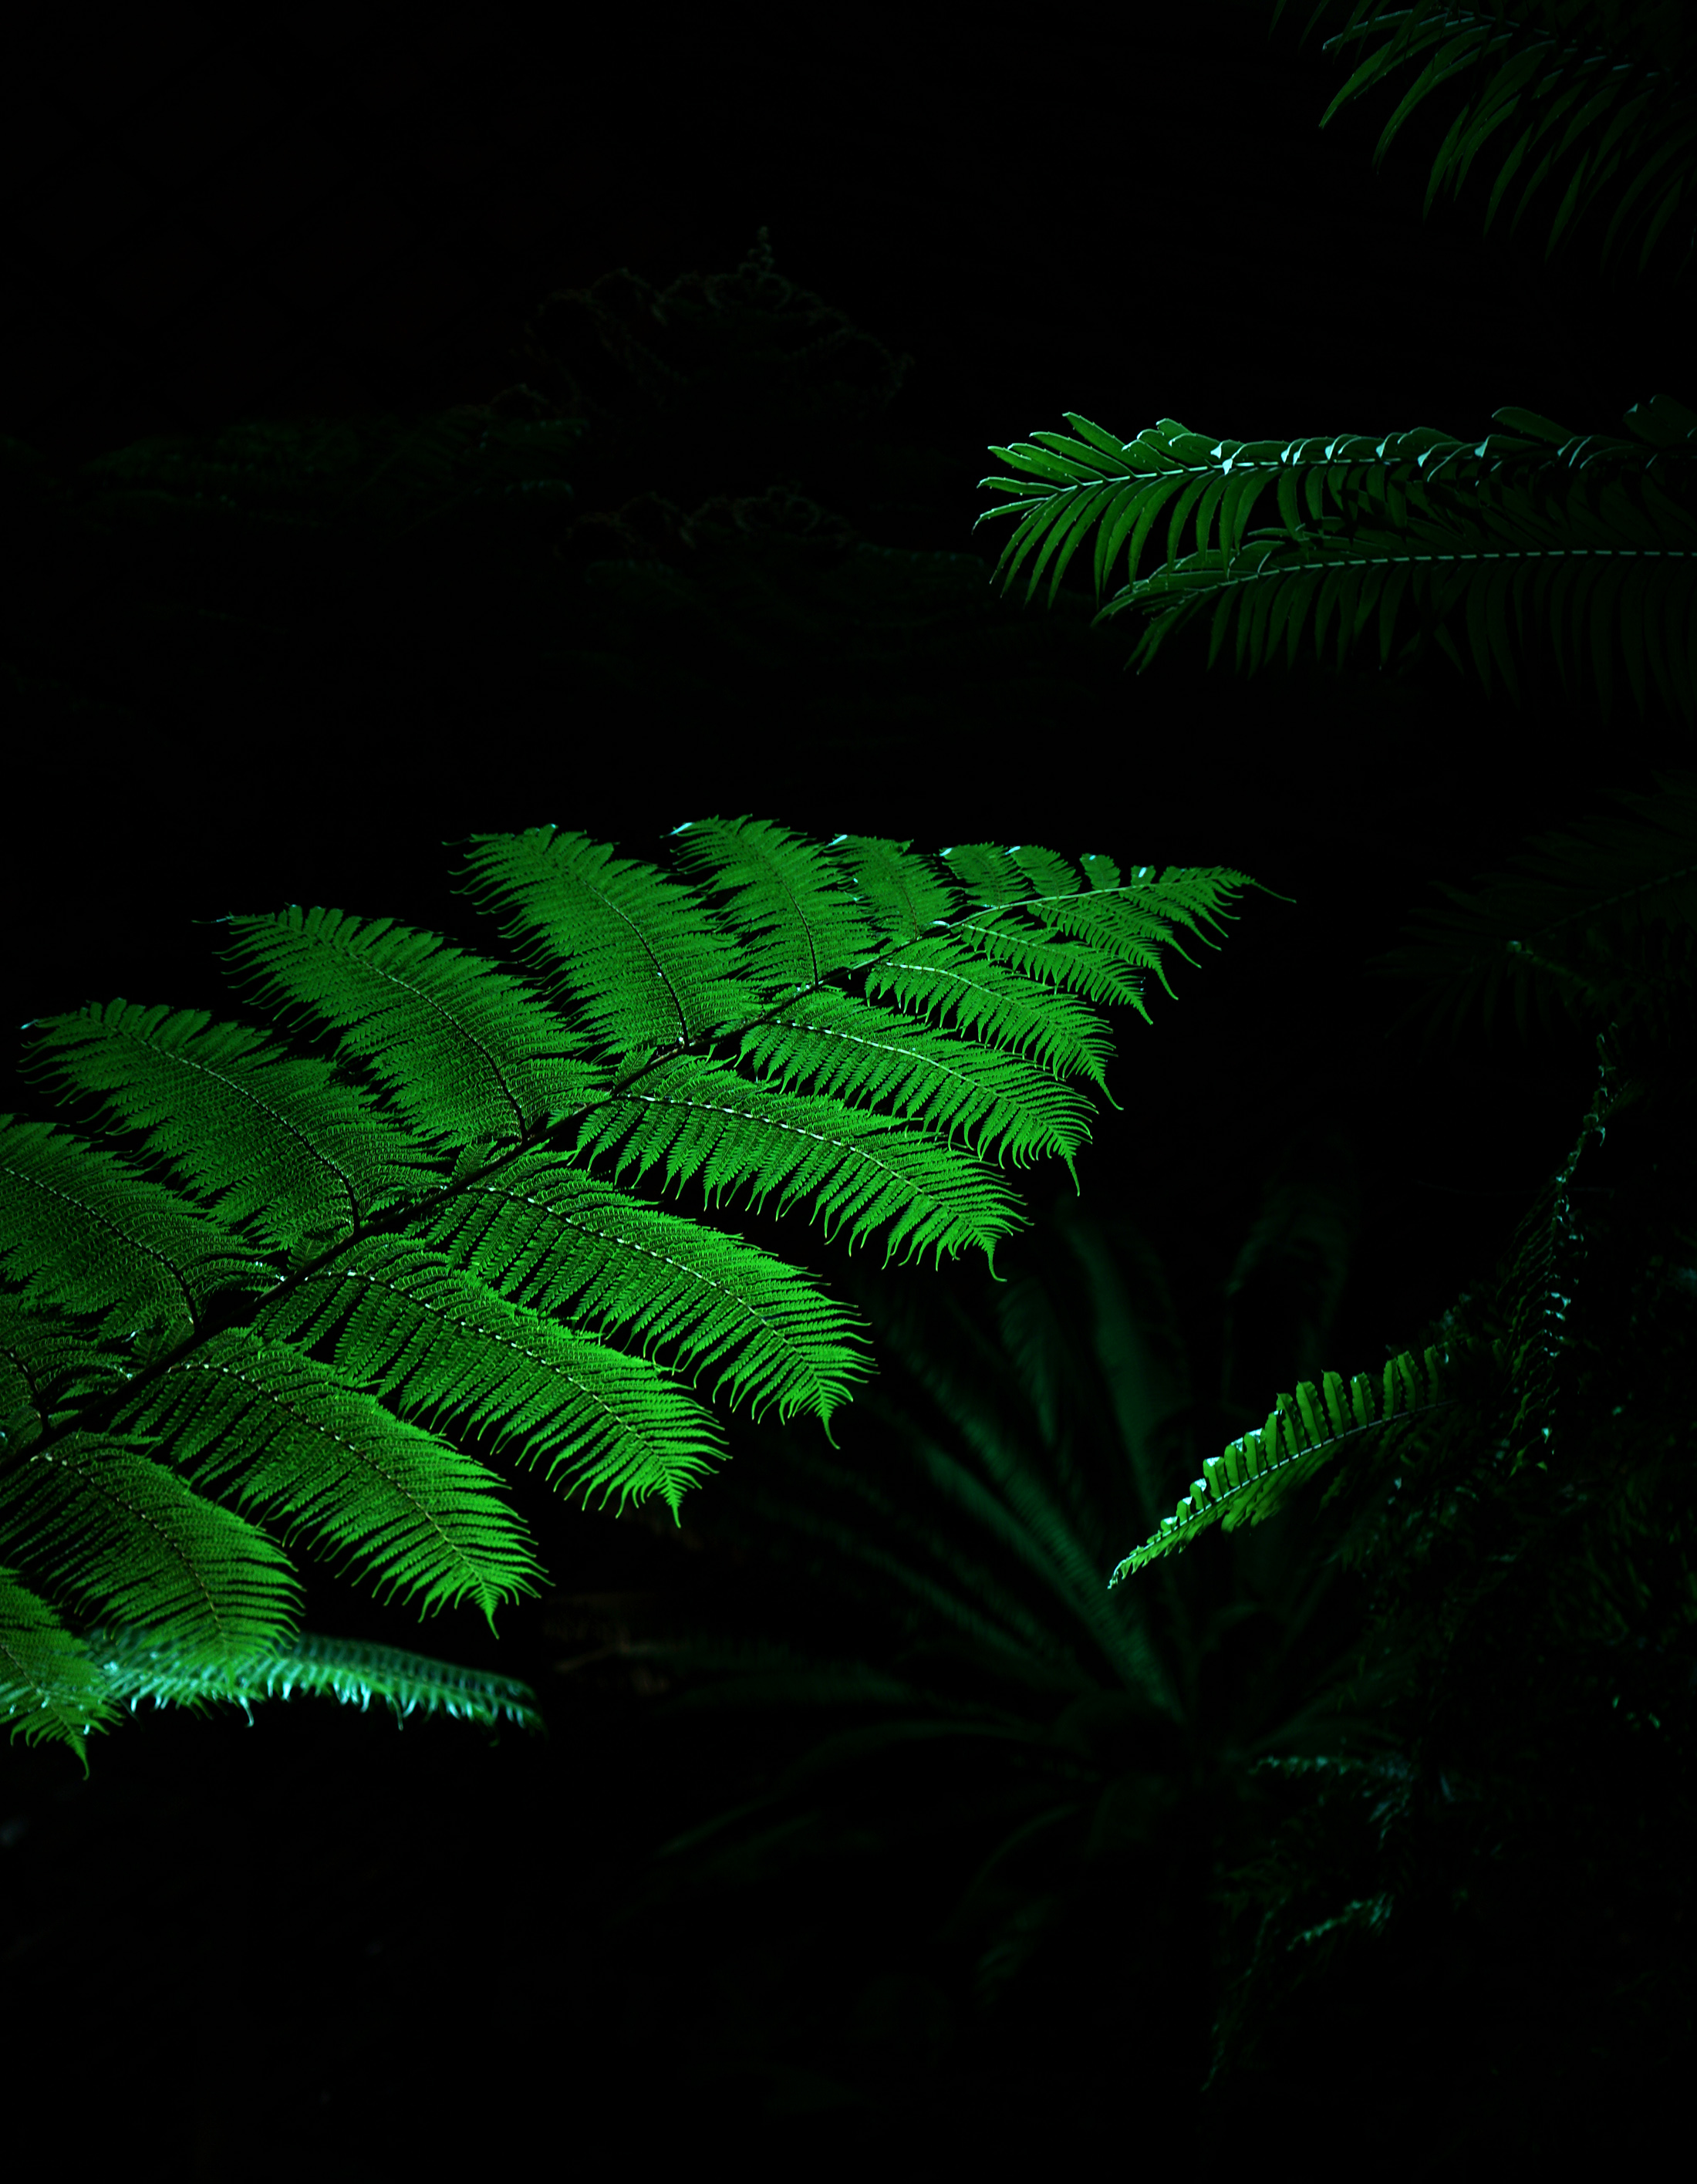 Fern fronds in the Garfield Park Conservatory at night, Chicago / Darker than Green